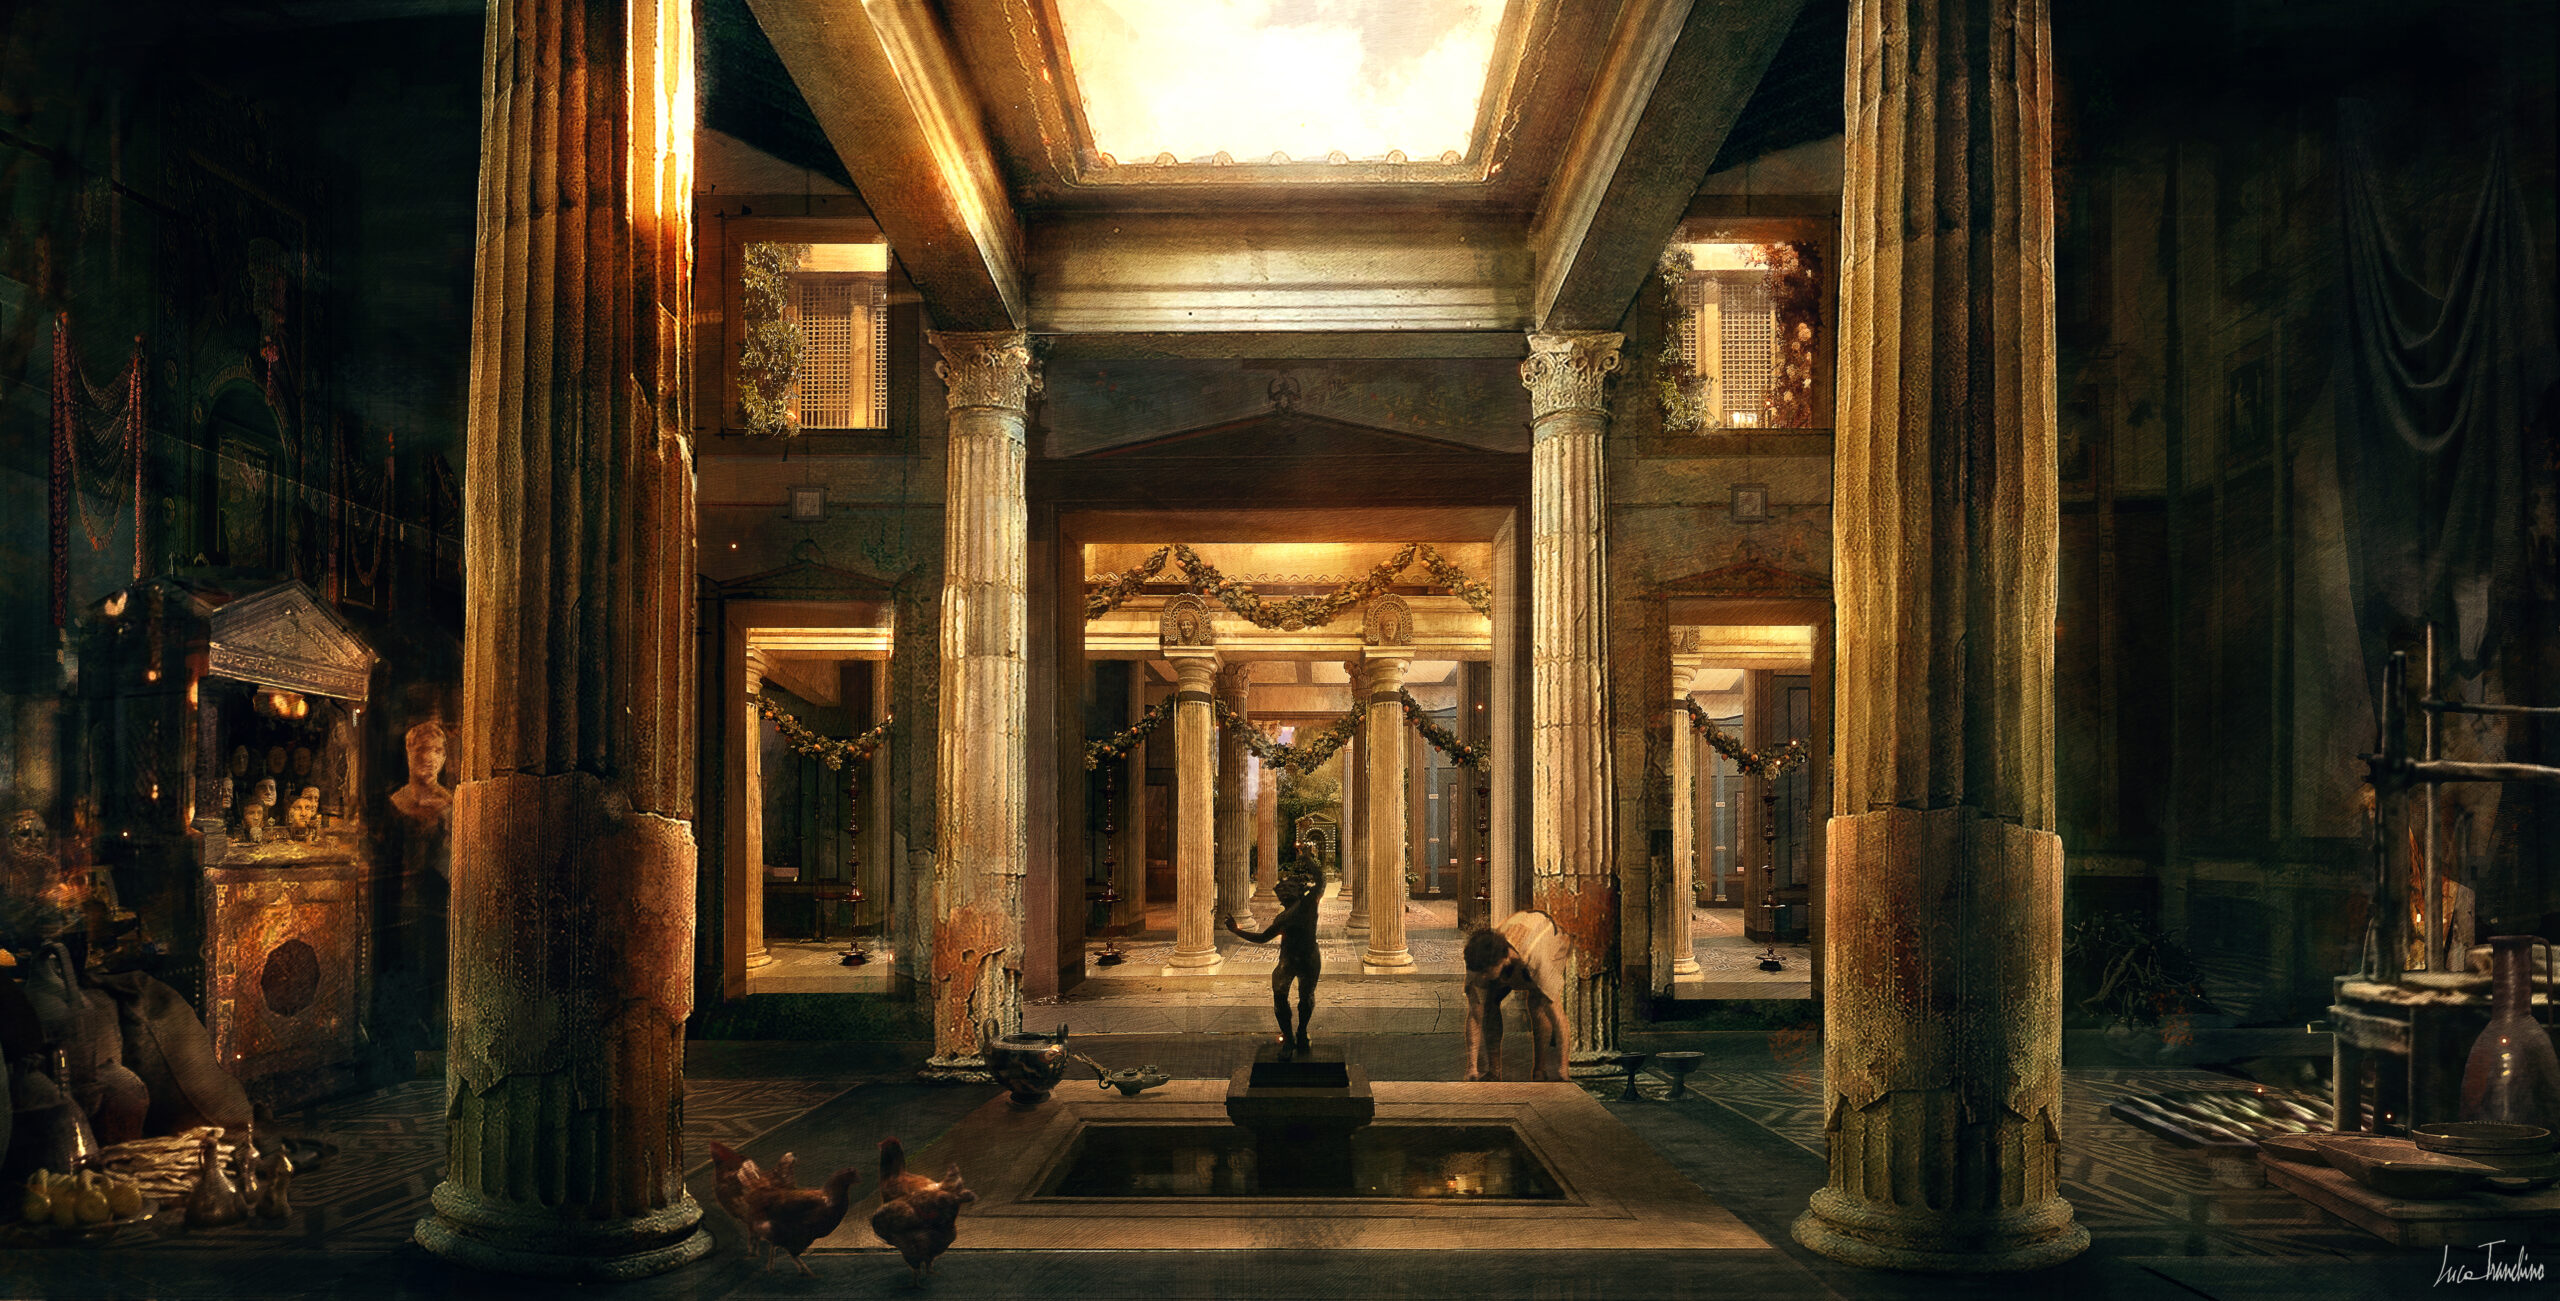 DOMINA - Production Design by Luca Tranchino - Int. House of Livius, Concept Art by Luca Tranchino - ©2021 - Sky Atlantic